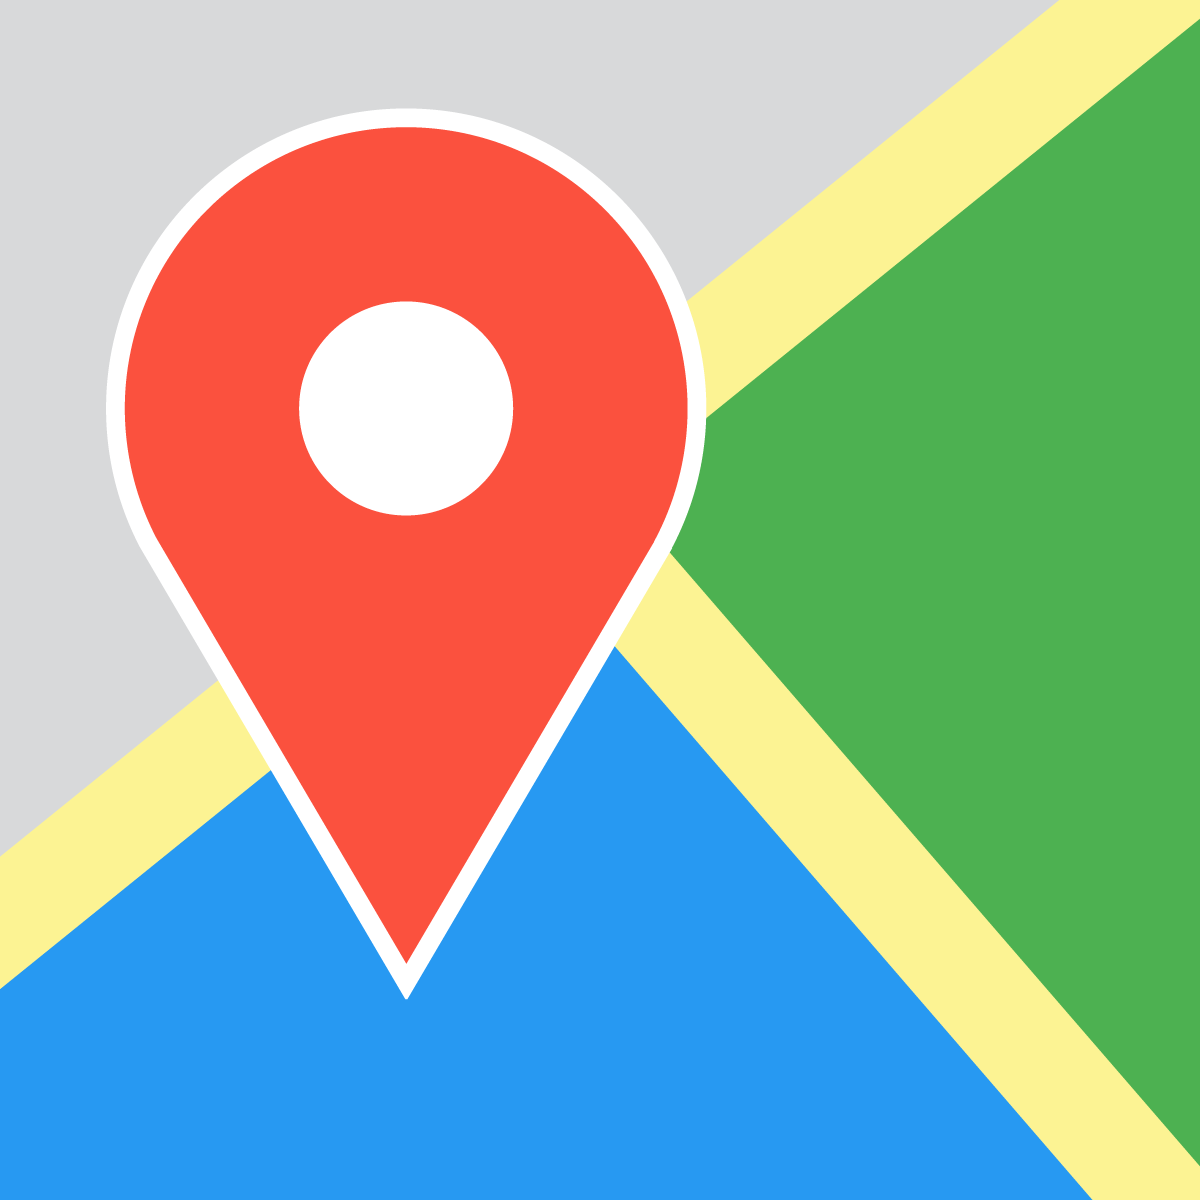 Hire Shopify Experts to integrate Maps by Develic app into a Shopify store